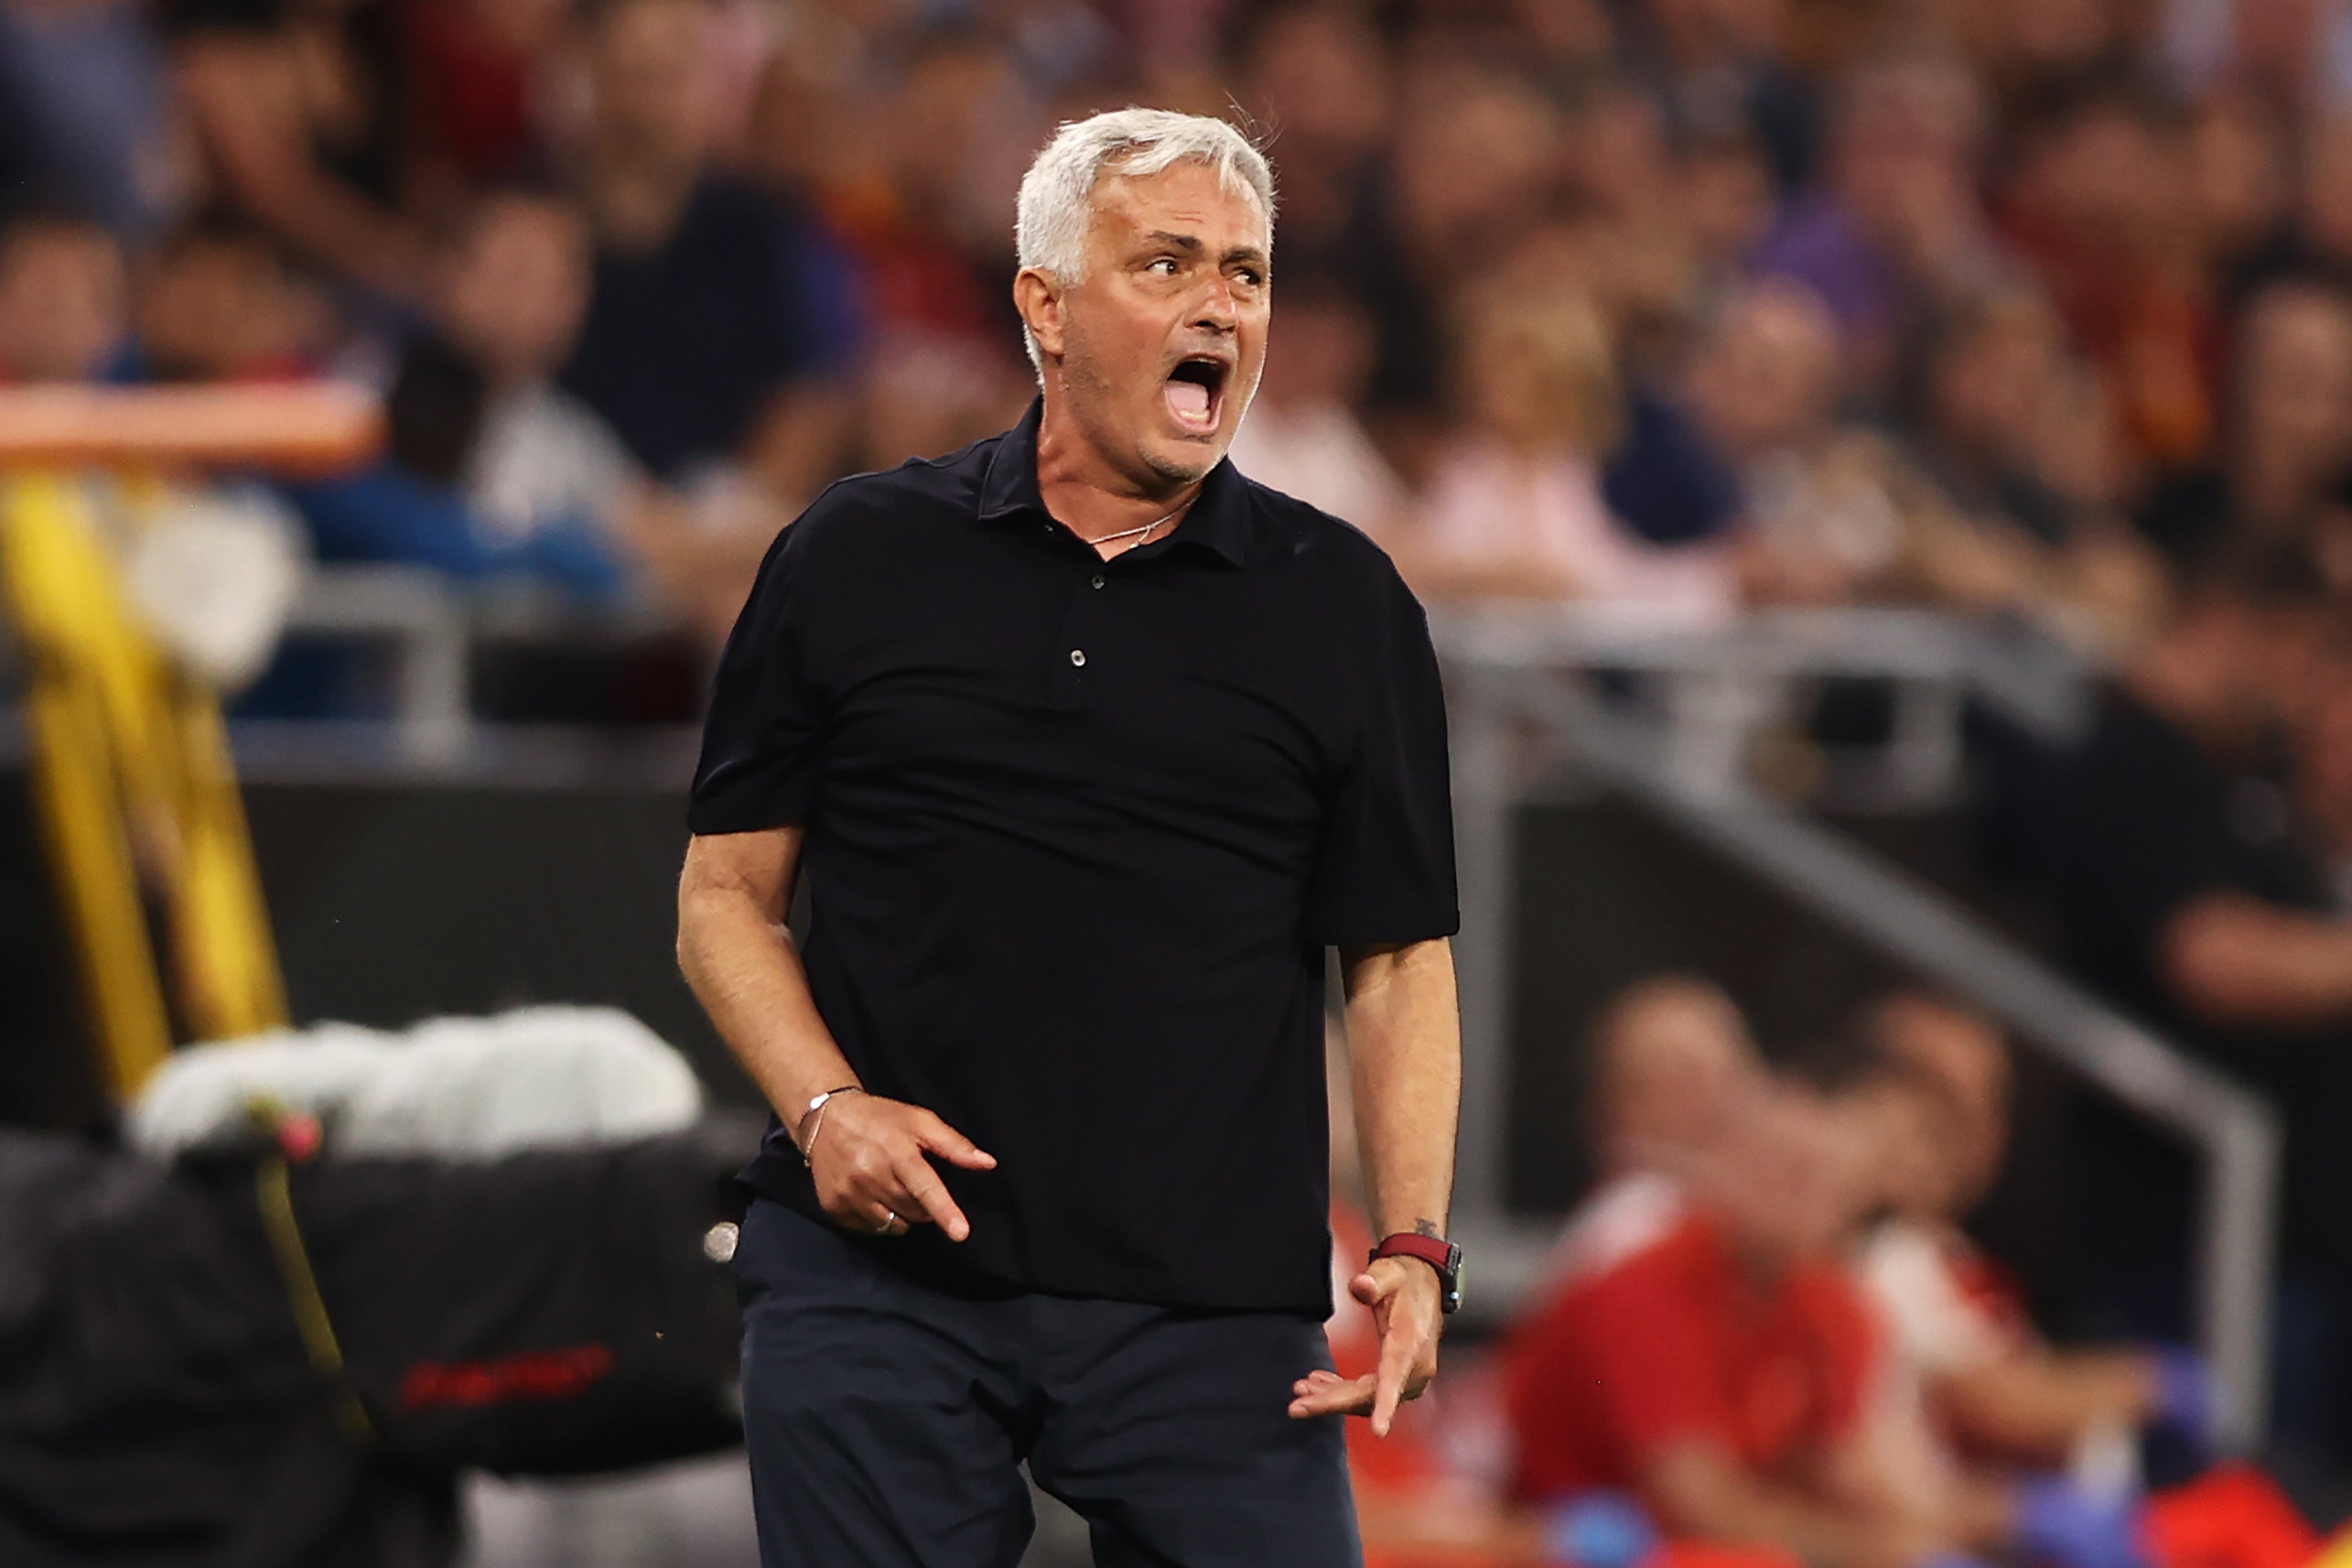 Jose Mourinho complains Europa League final was unfair result after Romas controversial defeat by Sevilla The Independent